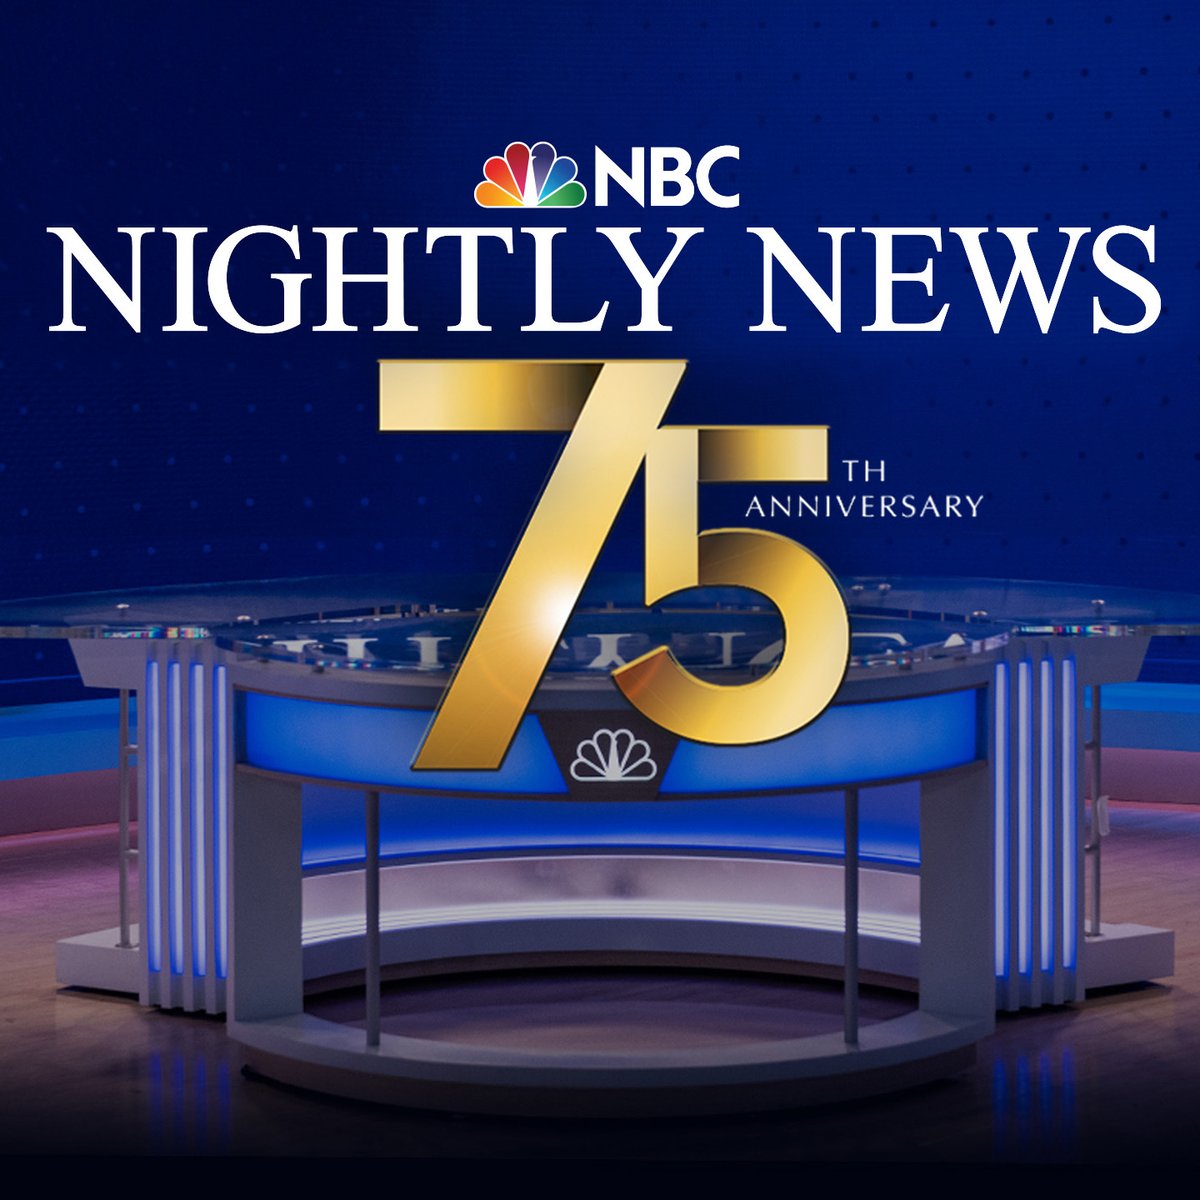 75 years of @NBCNightlyNews — join us as we celebrate this major milestone tonight on your local NBC station!

Congrats to @LesterHoltNBC and the team for advancing the broadcast’s historic legacy. #NightlyNews75